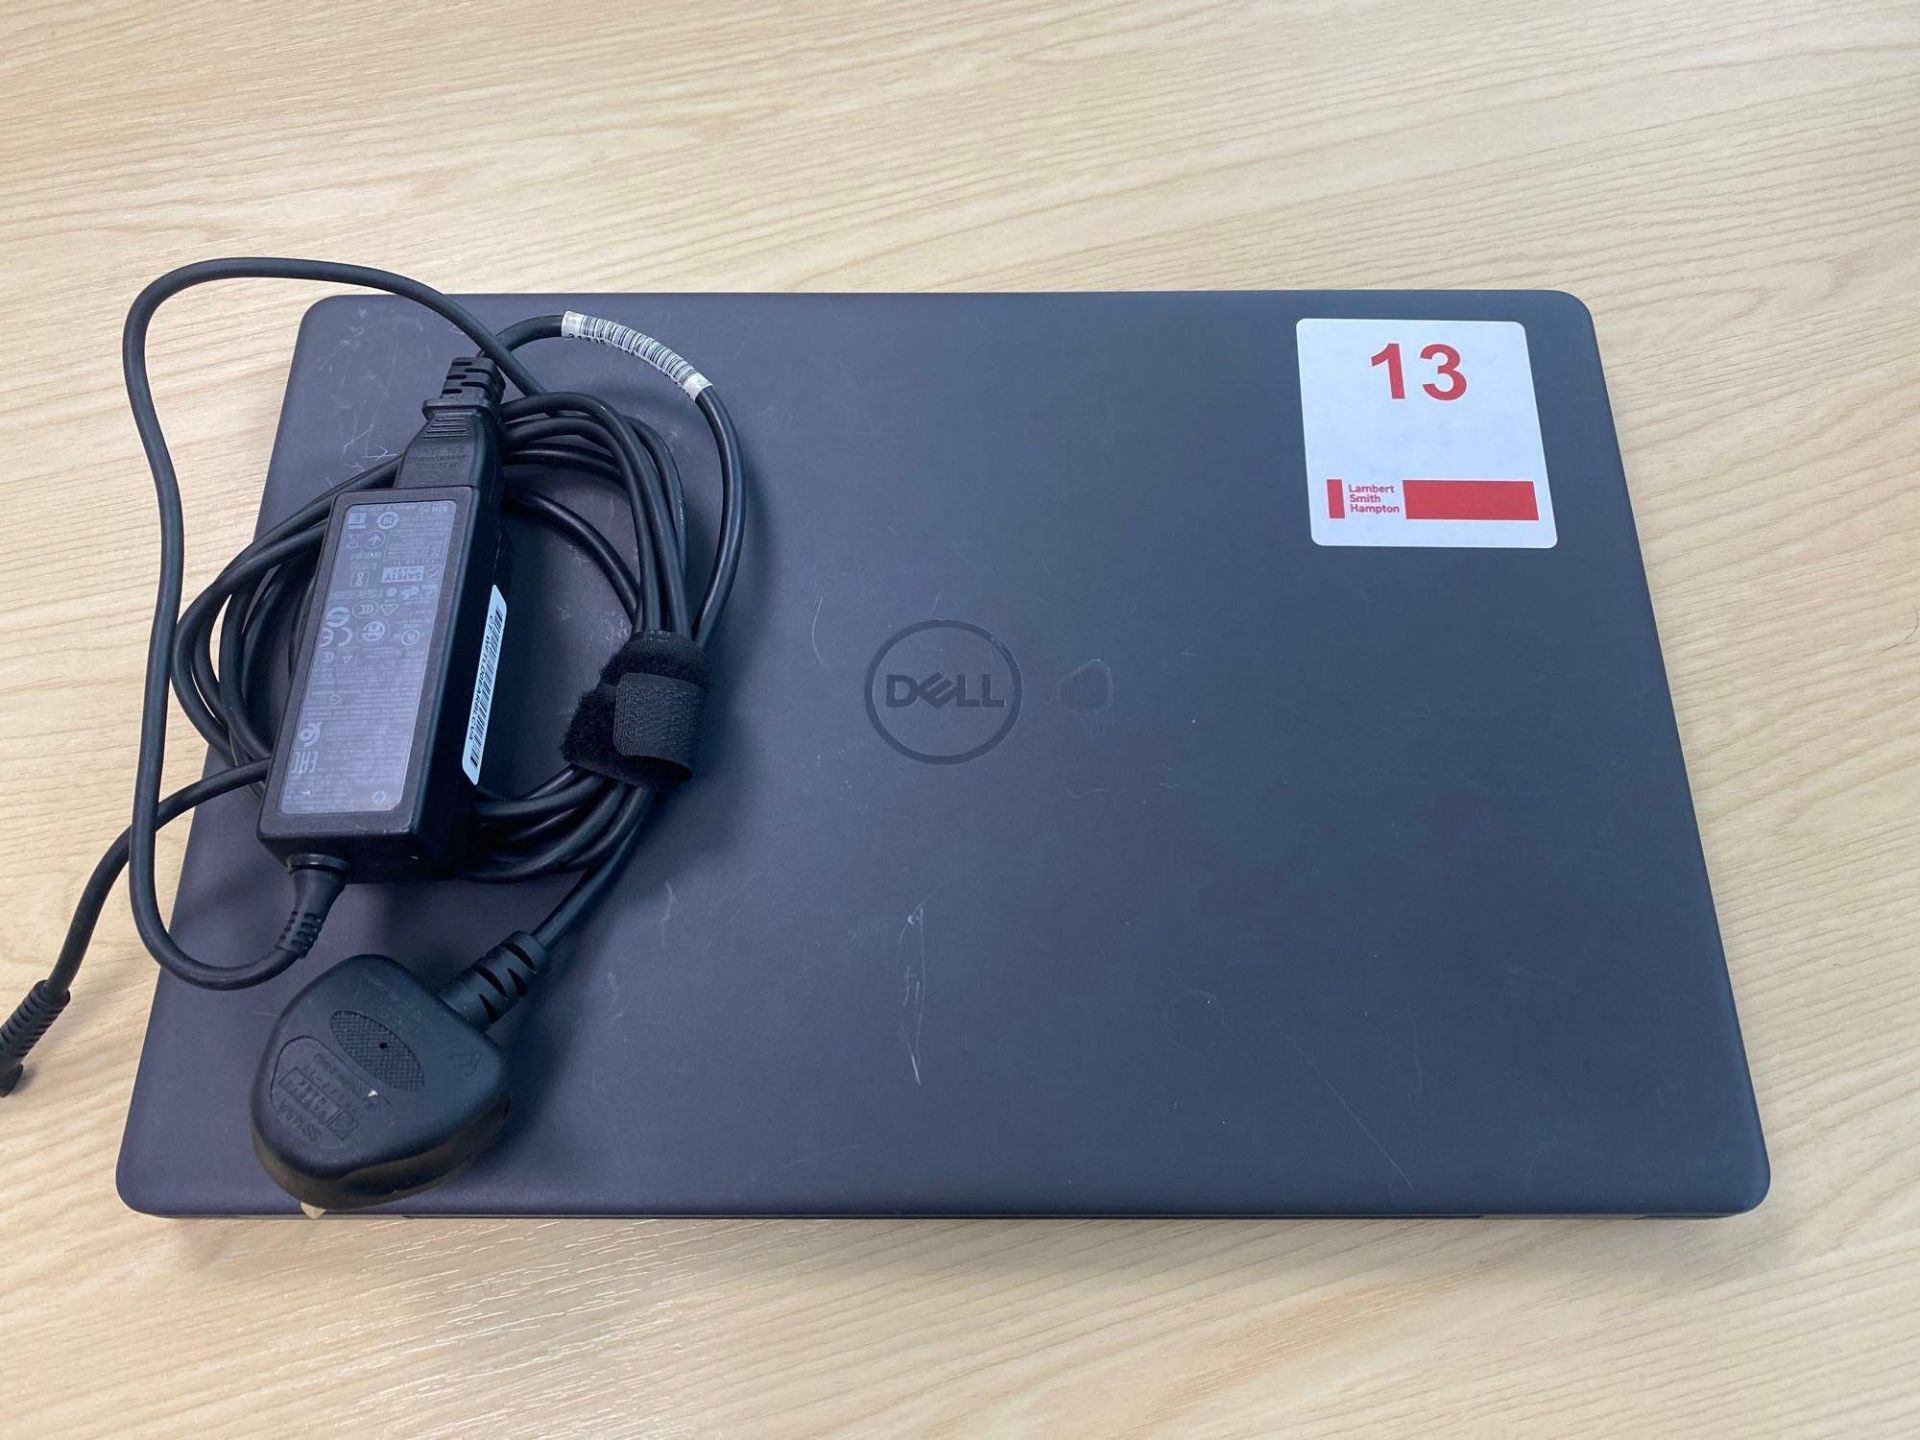 Dell Inspiron 15” laptop with i3 processor complete with charger - Image 5 of 5